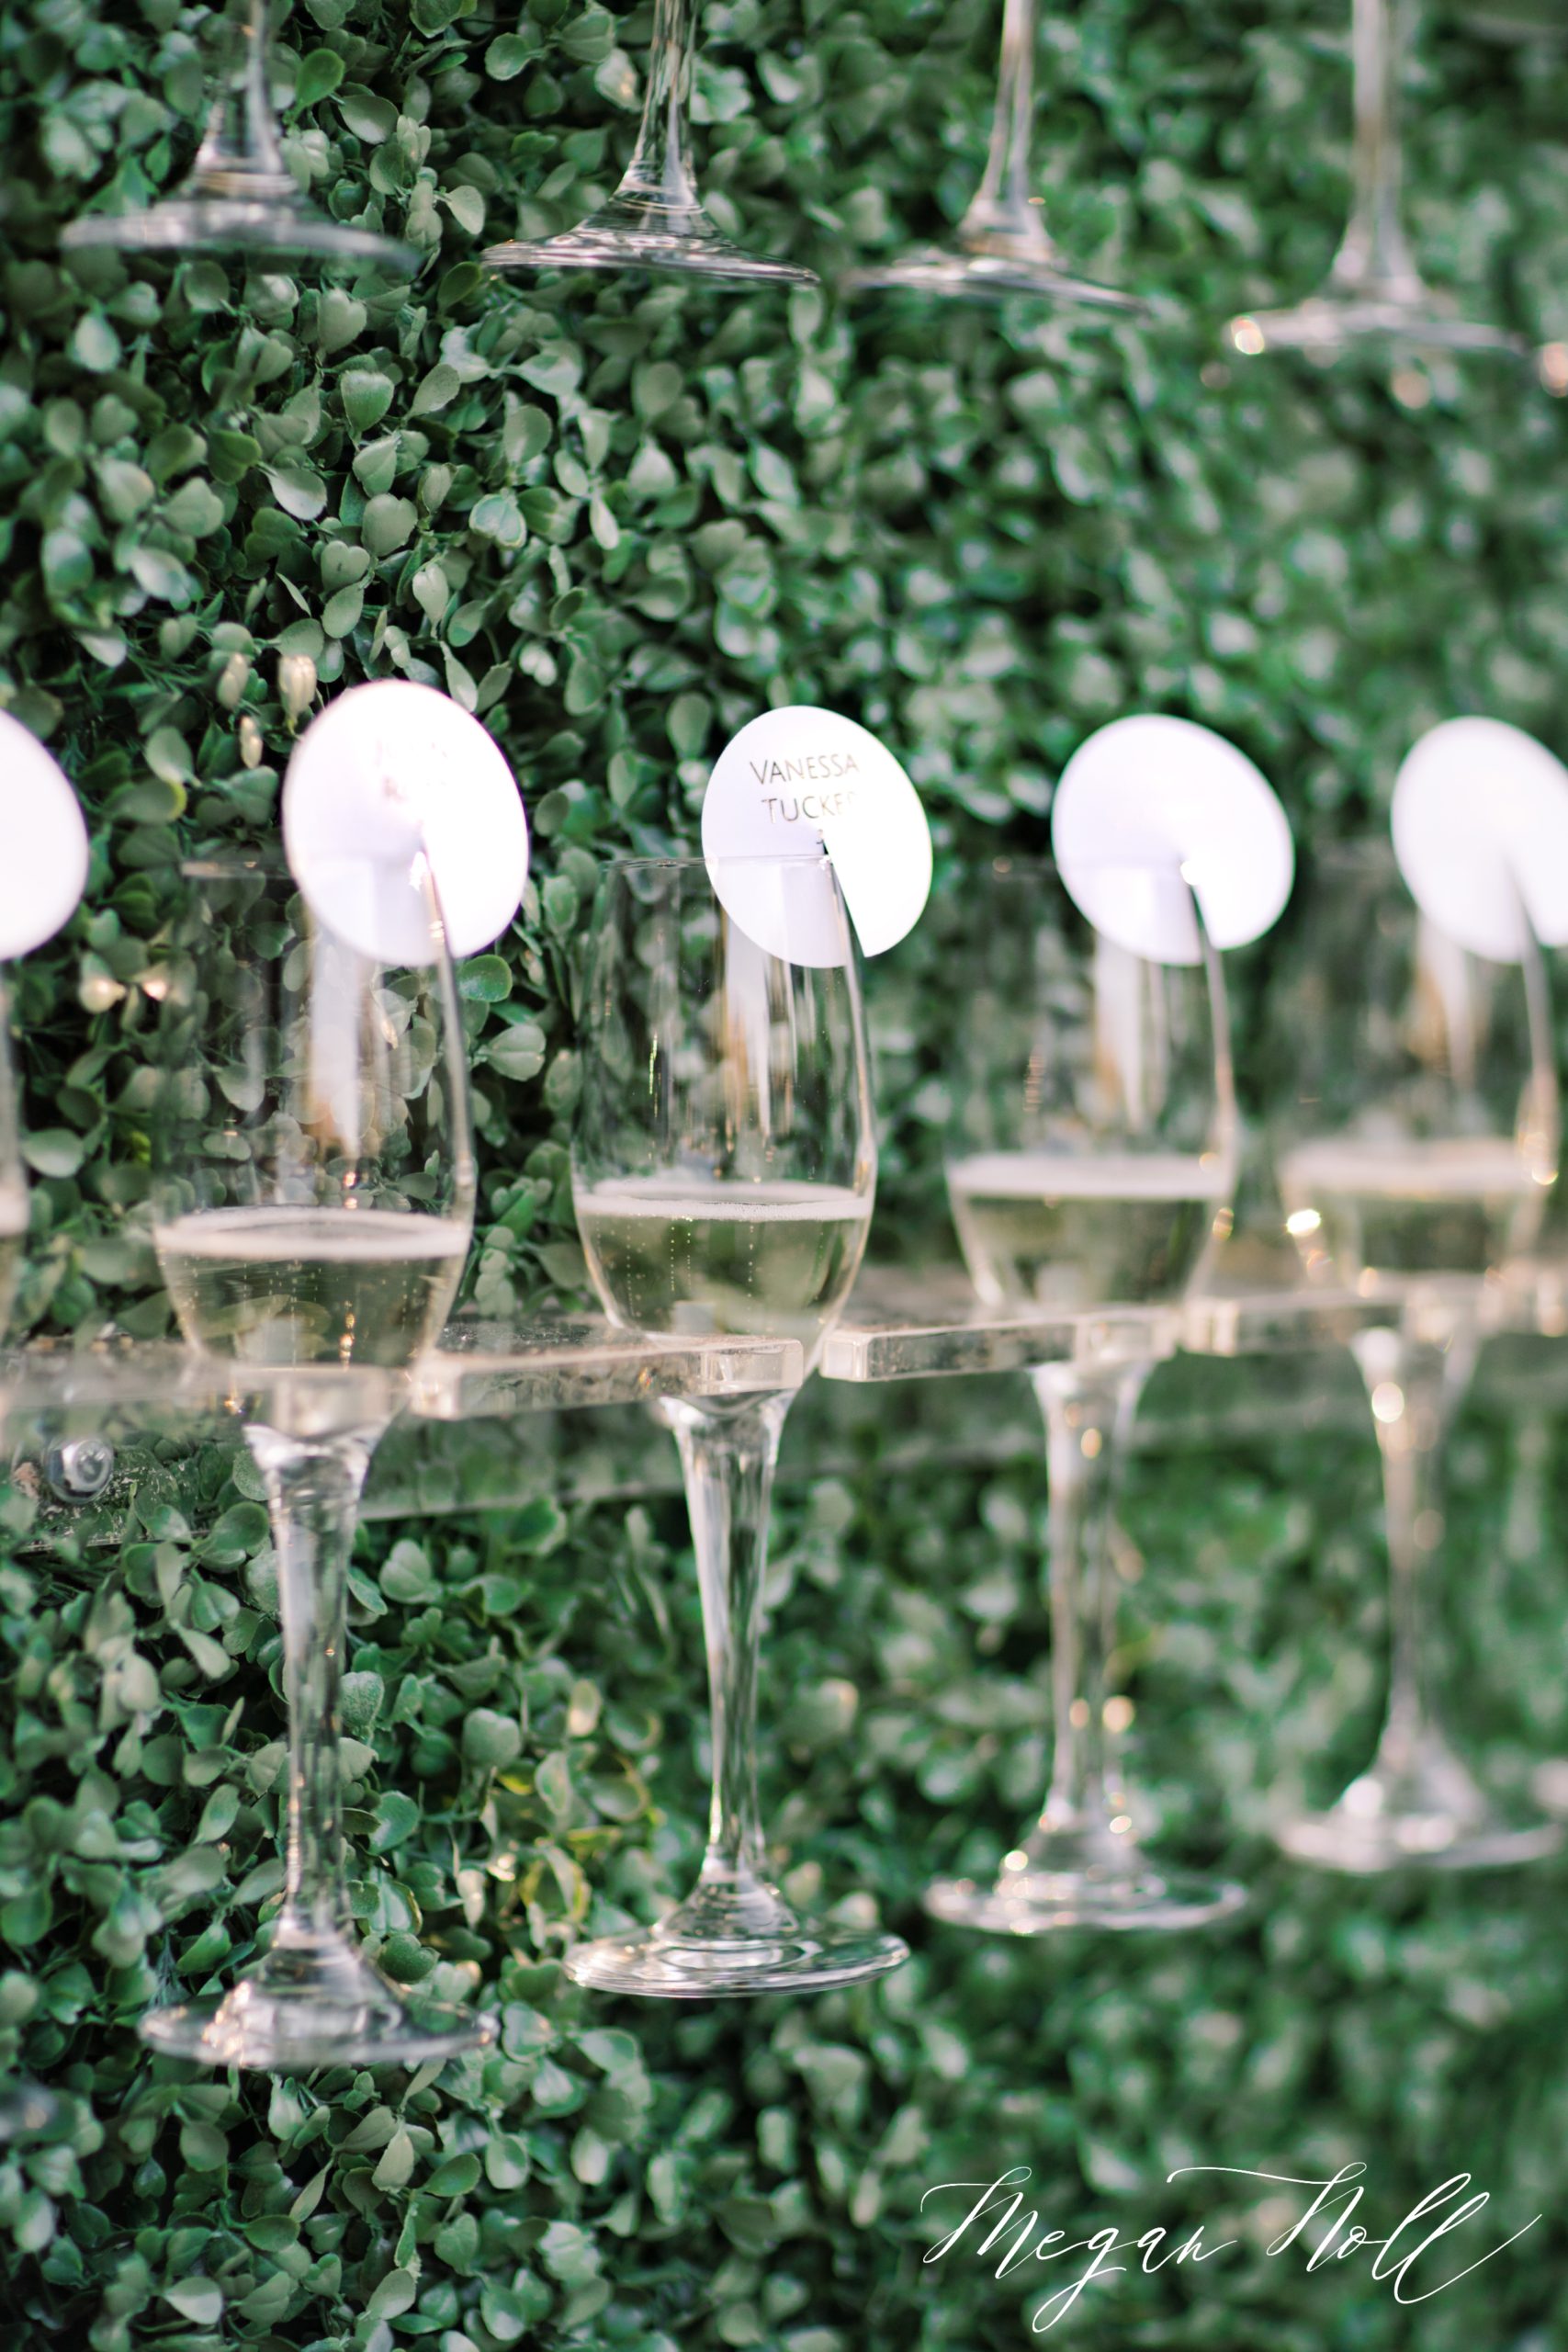 Champagne Wall holds guest cards designed by Some Like It Classic Wedding Planner